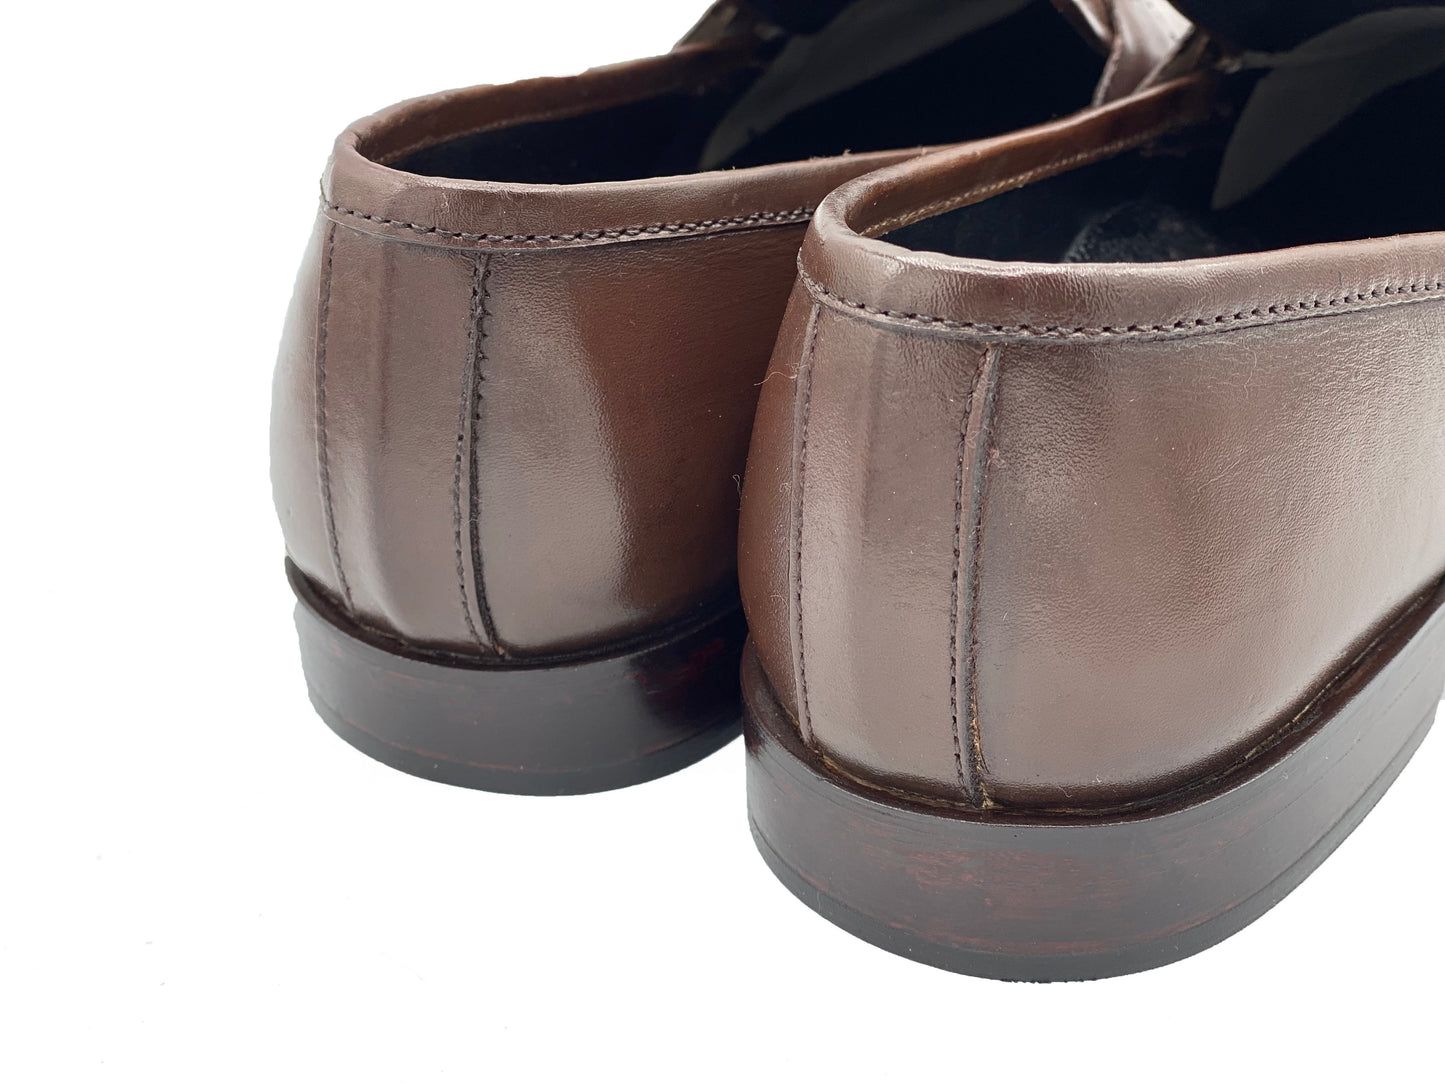 SKU:4001-Brown Cow Leather Formal Loafer Style